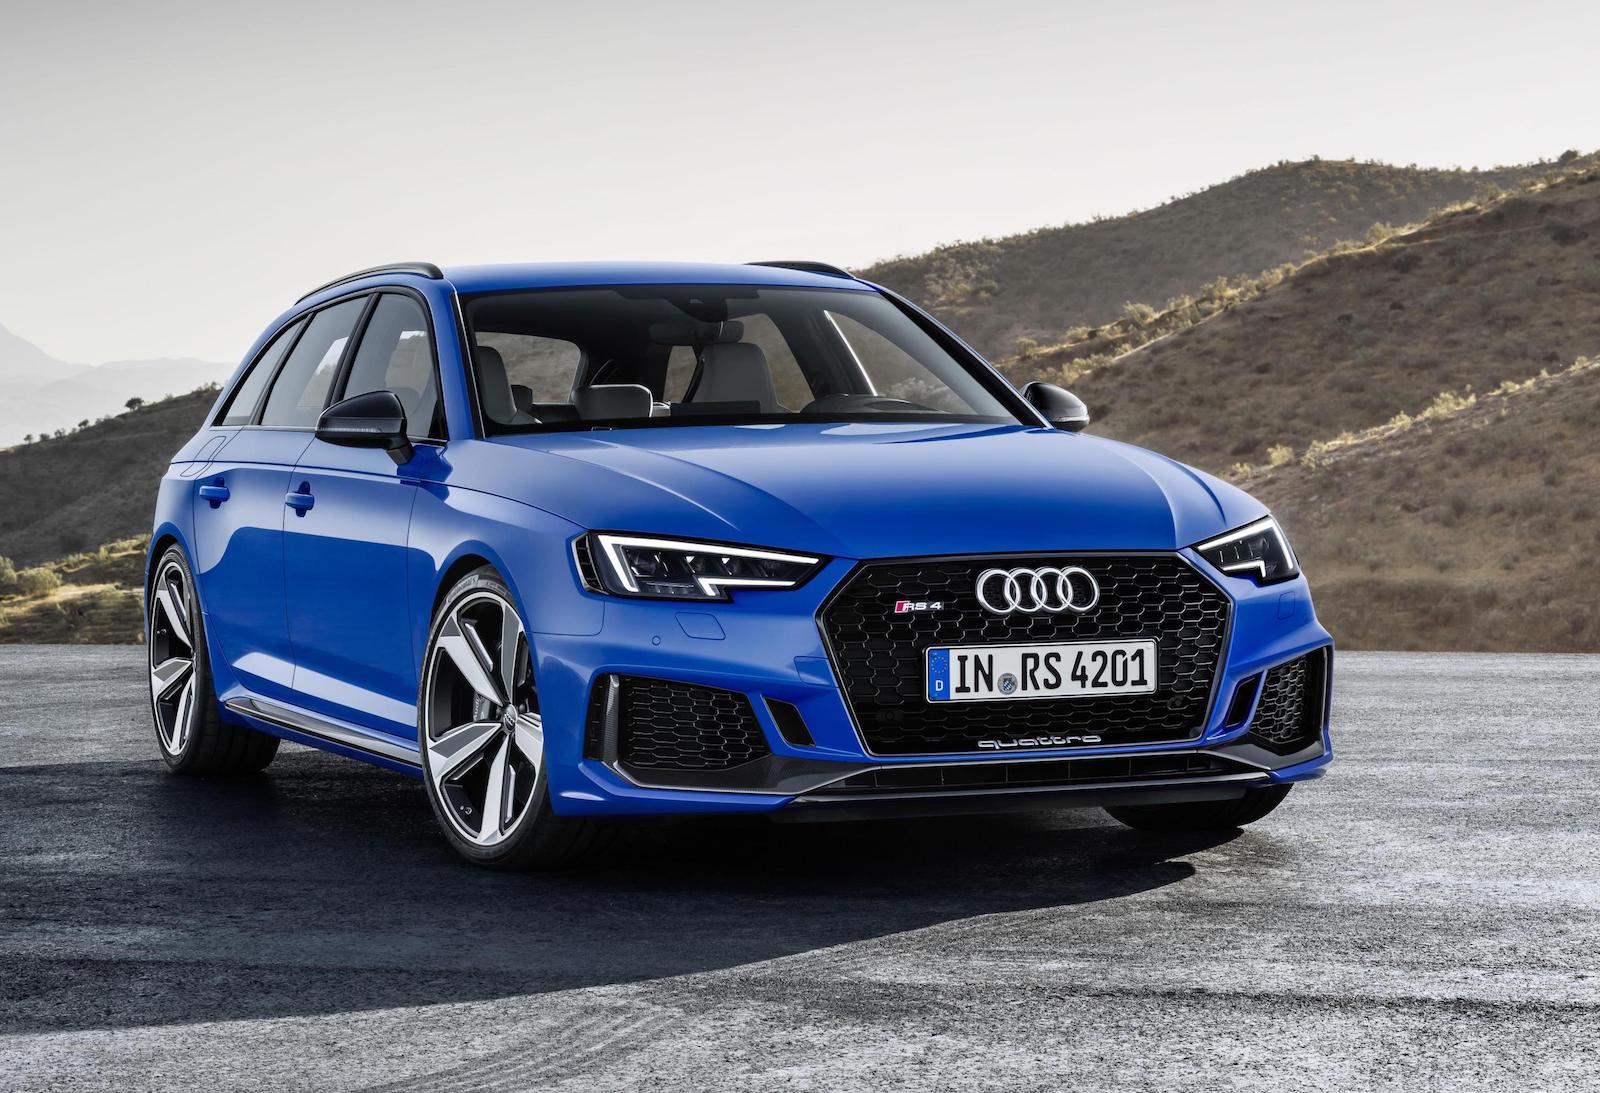 2018 Audi RS 4 Avant unveiled with 2.9 twin-turbo V6